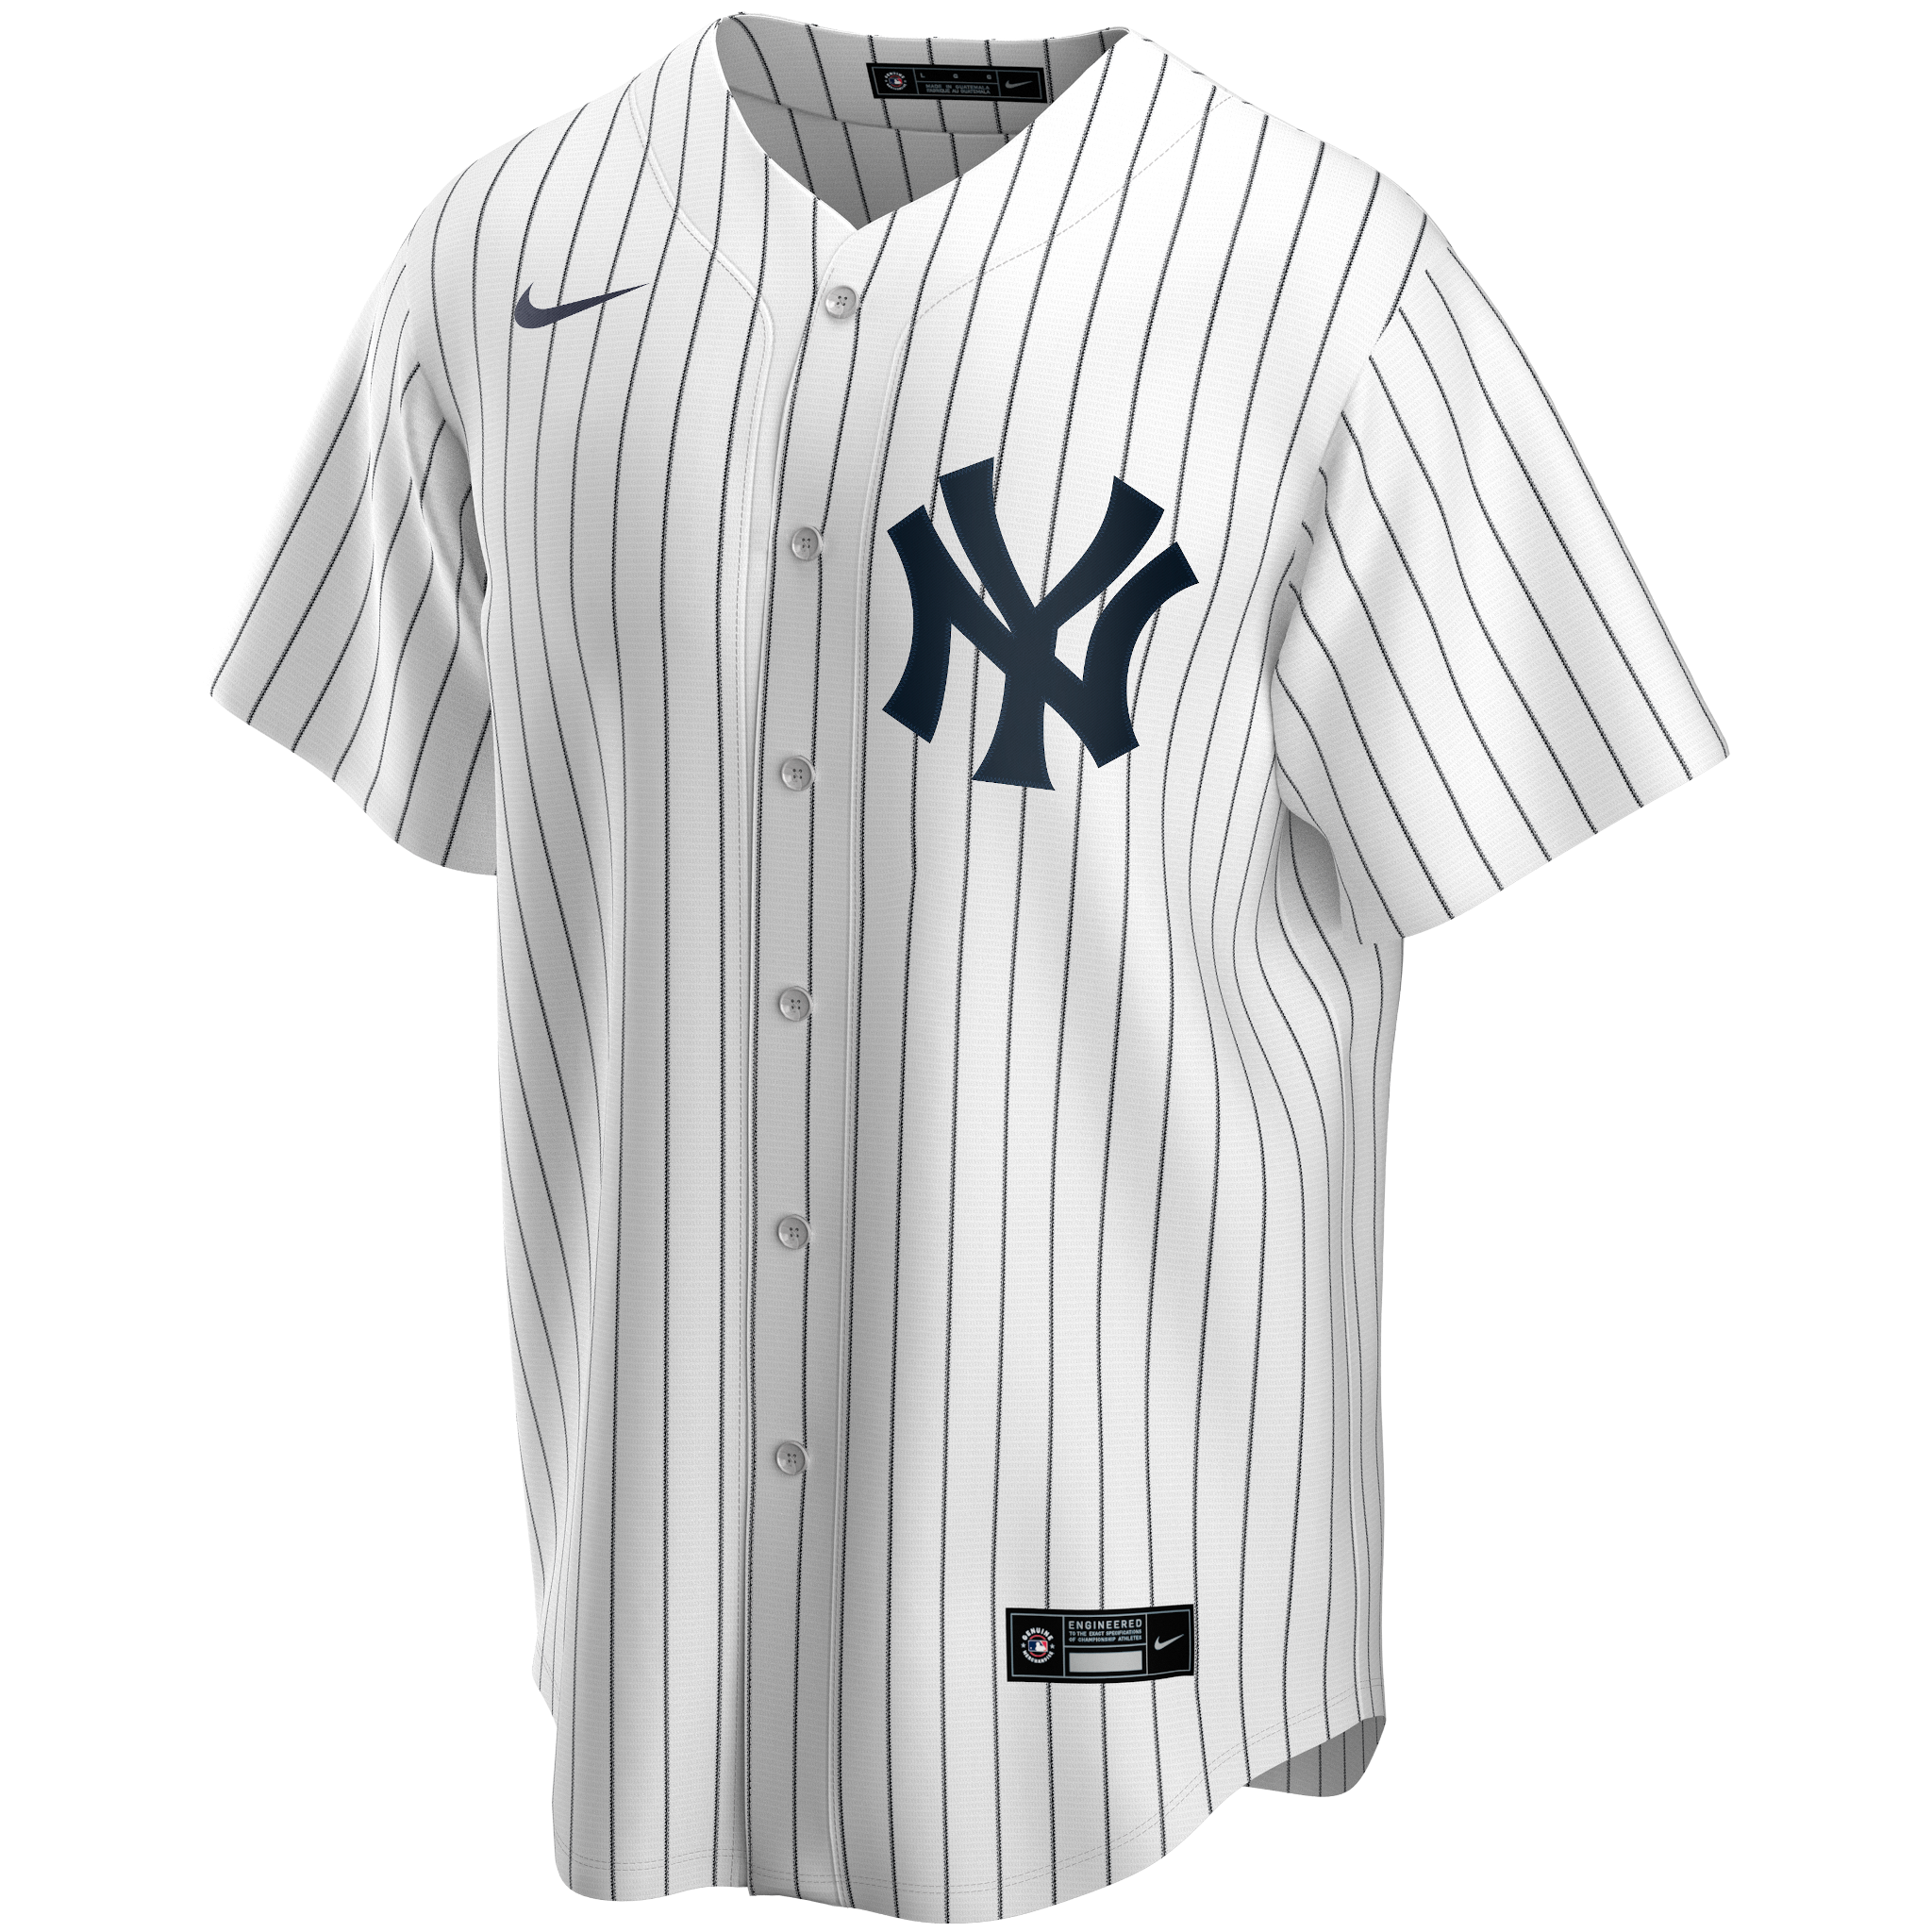 Custom Baseball Jersey Embroidered Your Names and Numbers – Pinstripe(White/Black)  - Blank Jerseys